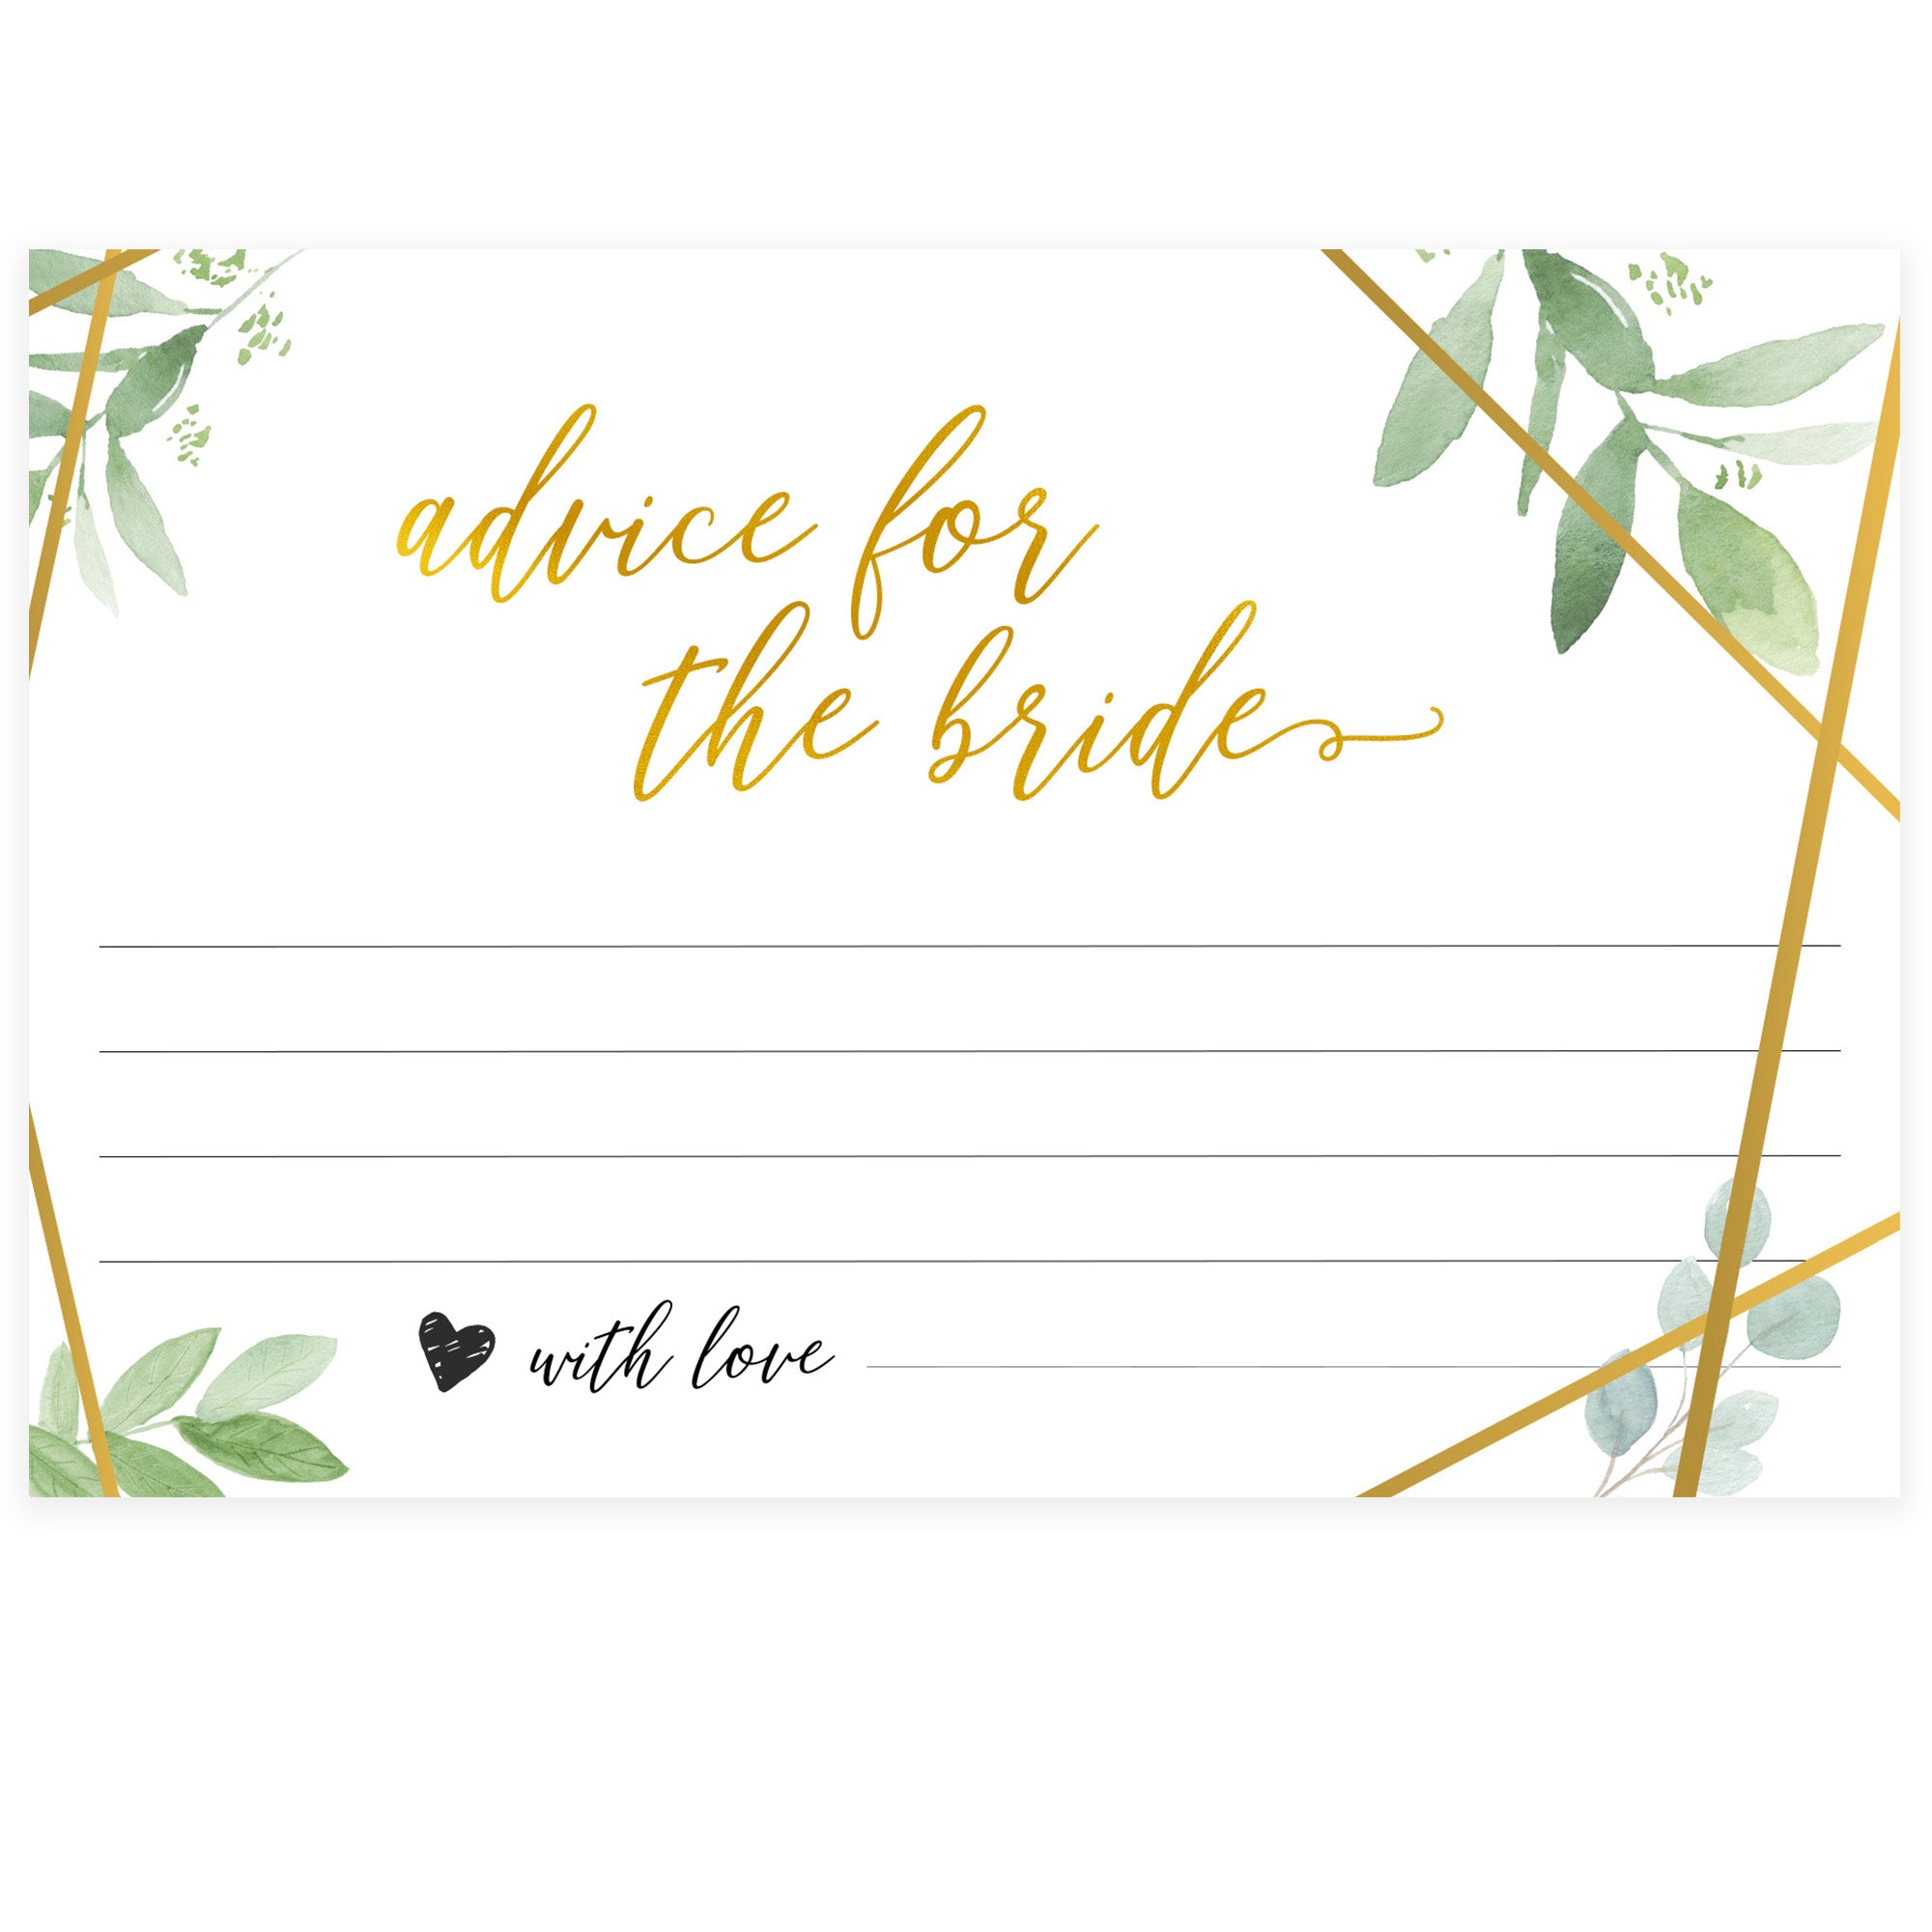 Advice for the Bride Cards - Gold Greenery